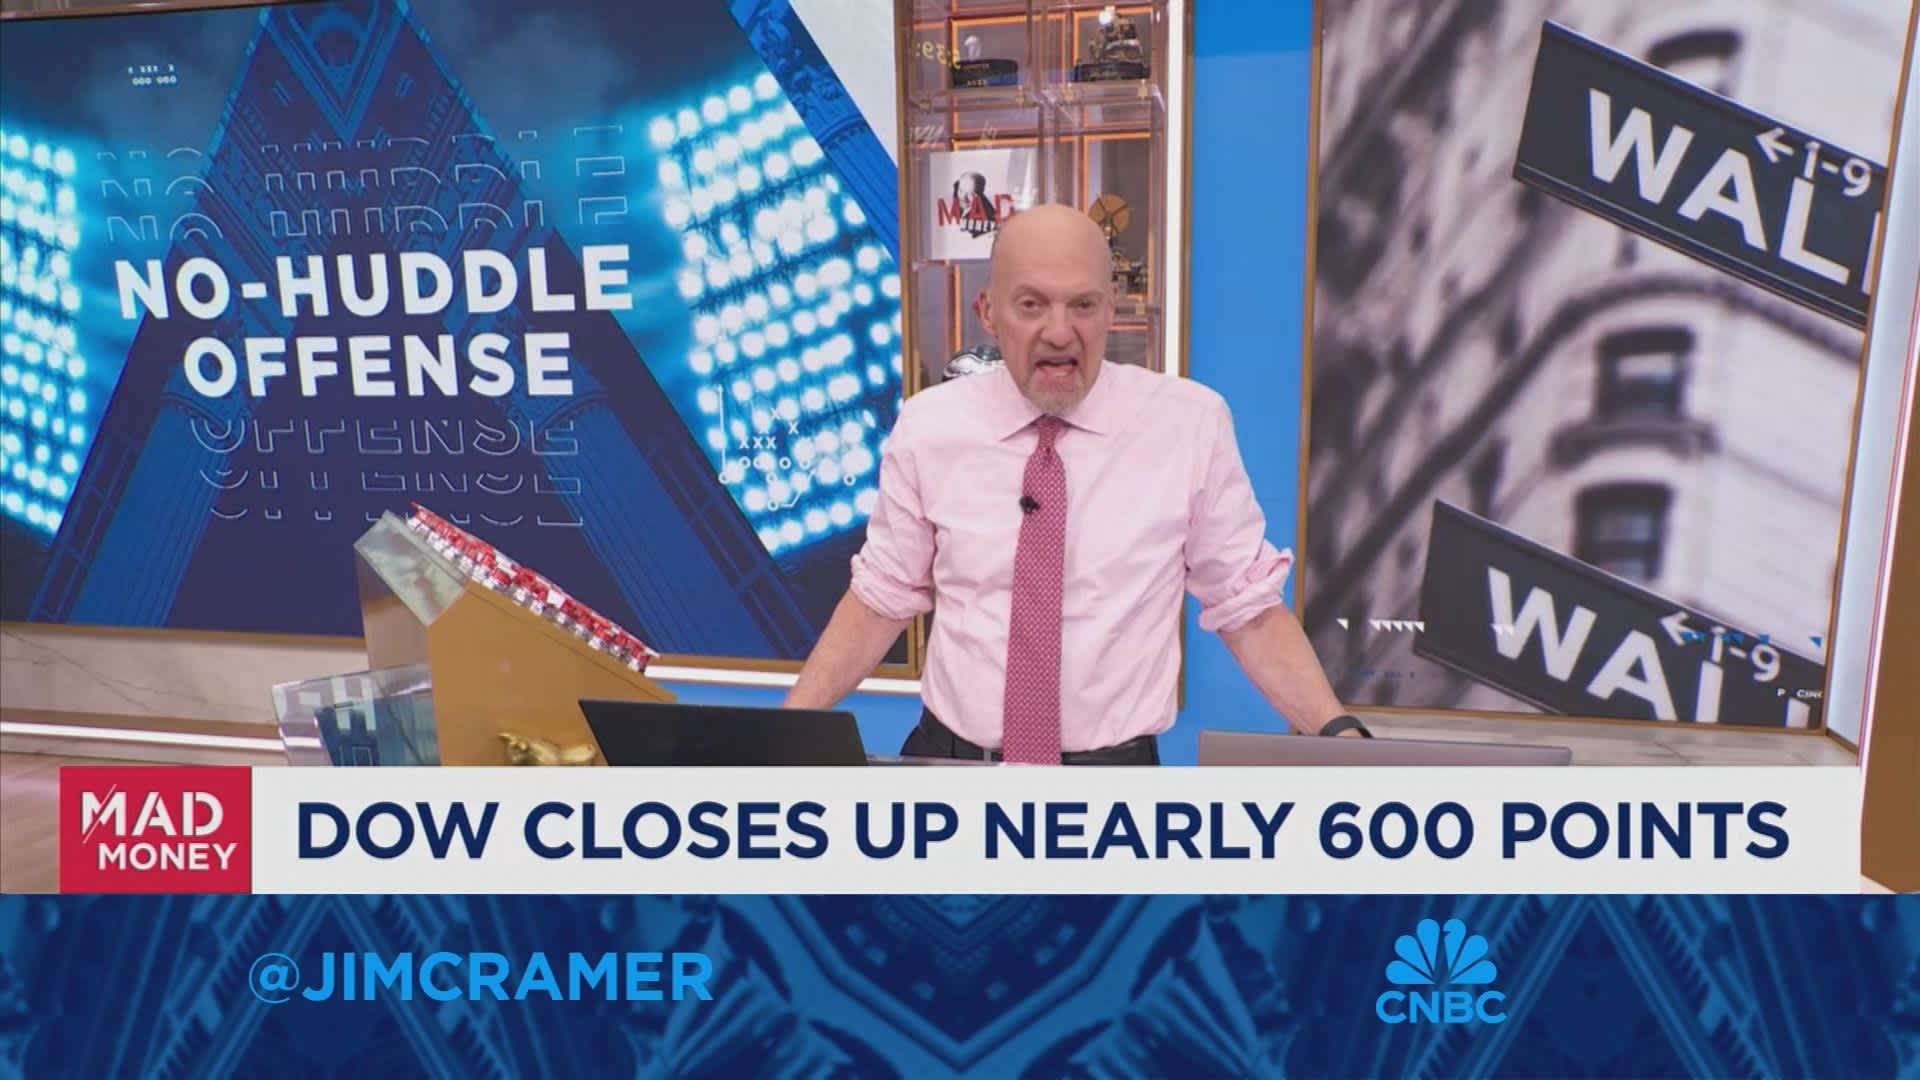 Pullbacks can turn out to be tremendous buying opportunities, says Jim Cramer on Costco